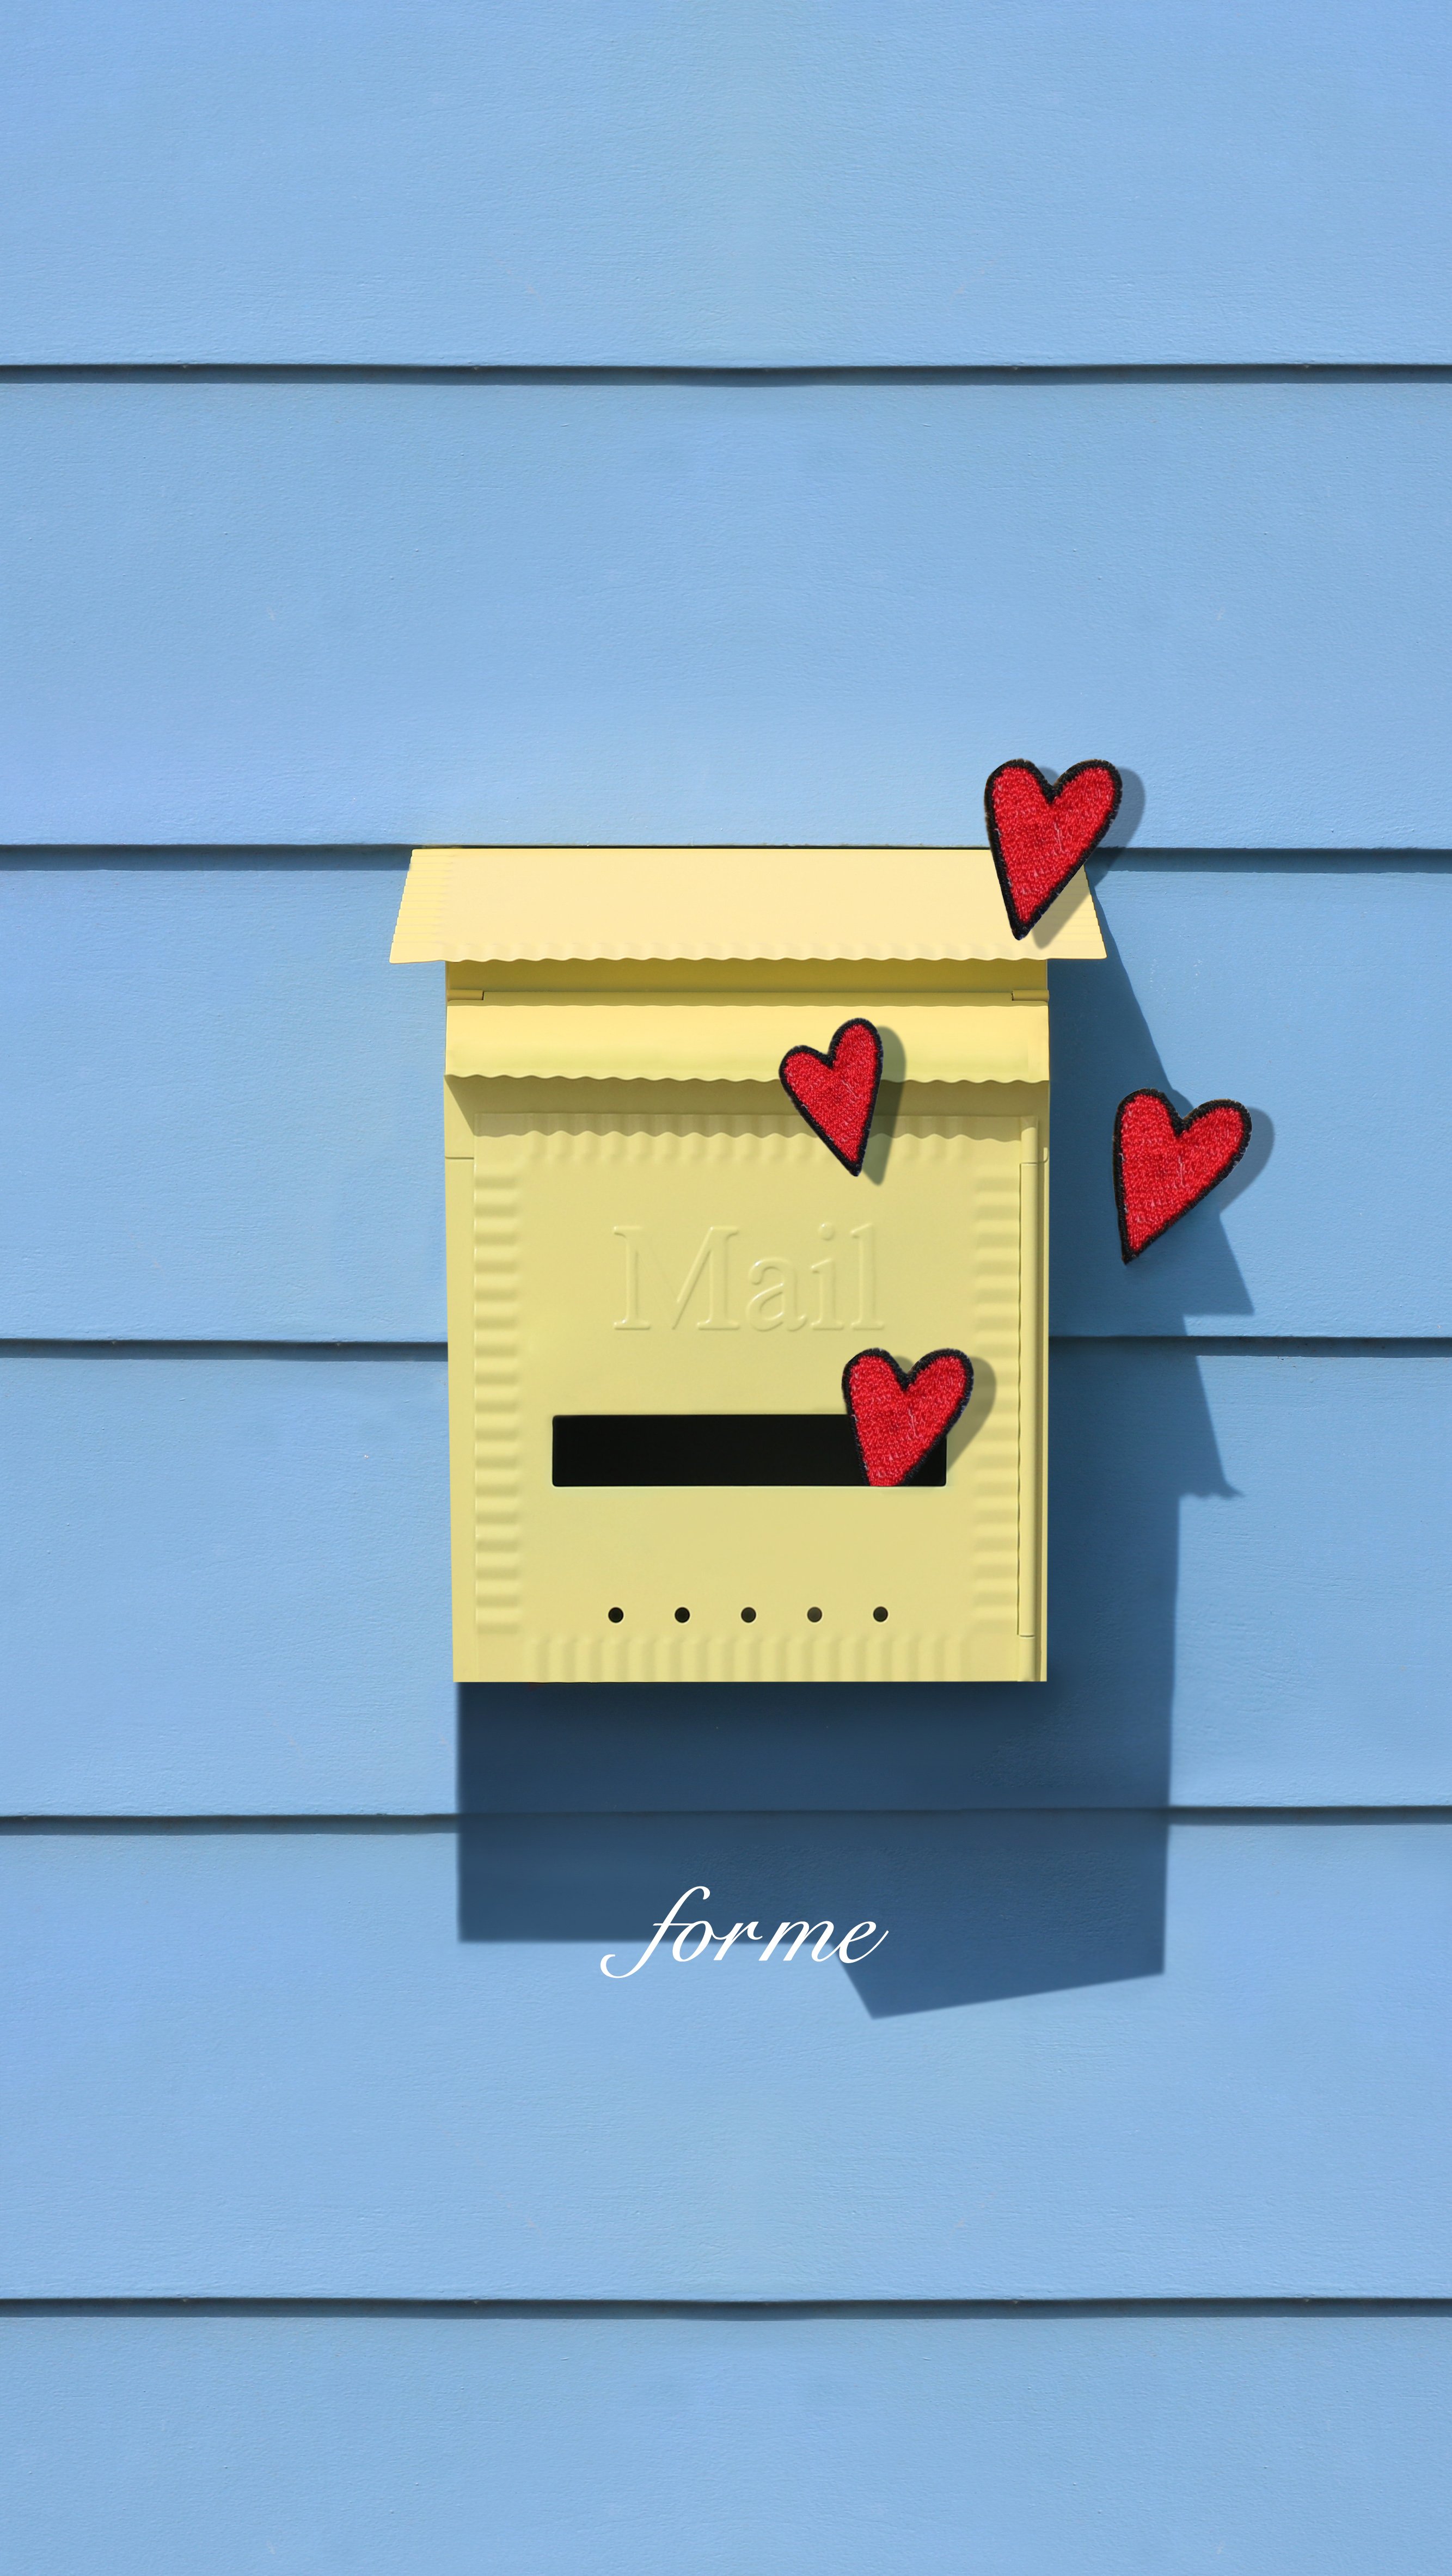 wallpapers for me,yellow,birdhouse,love,mail,illustration